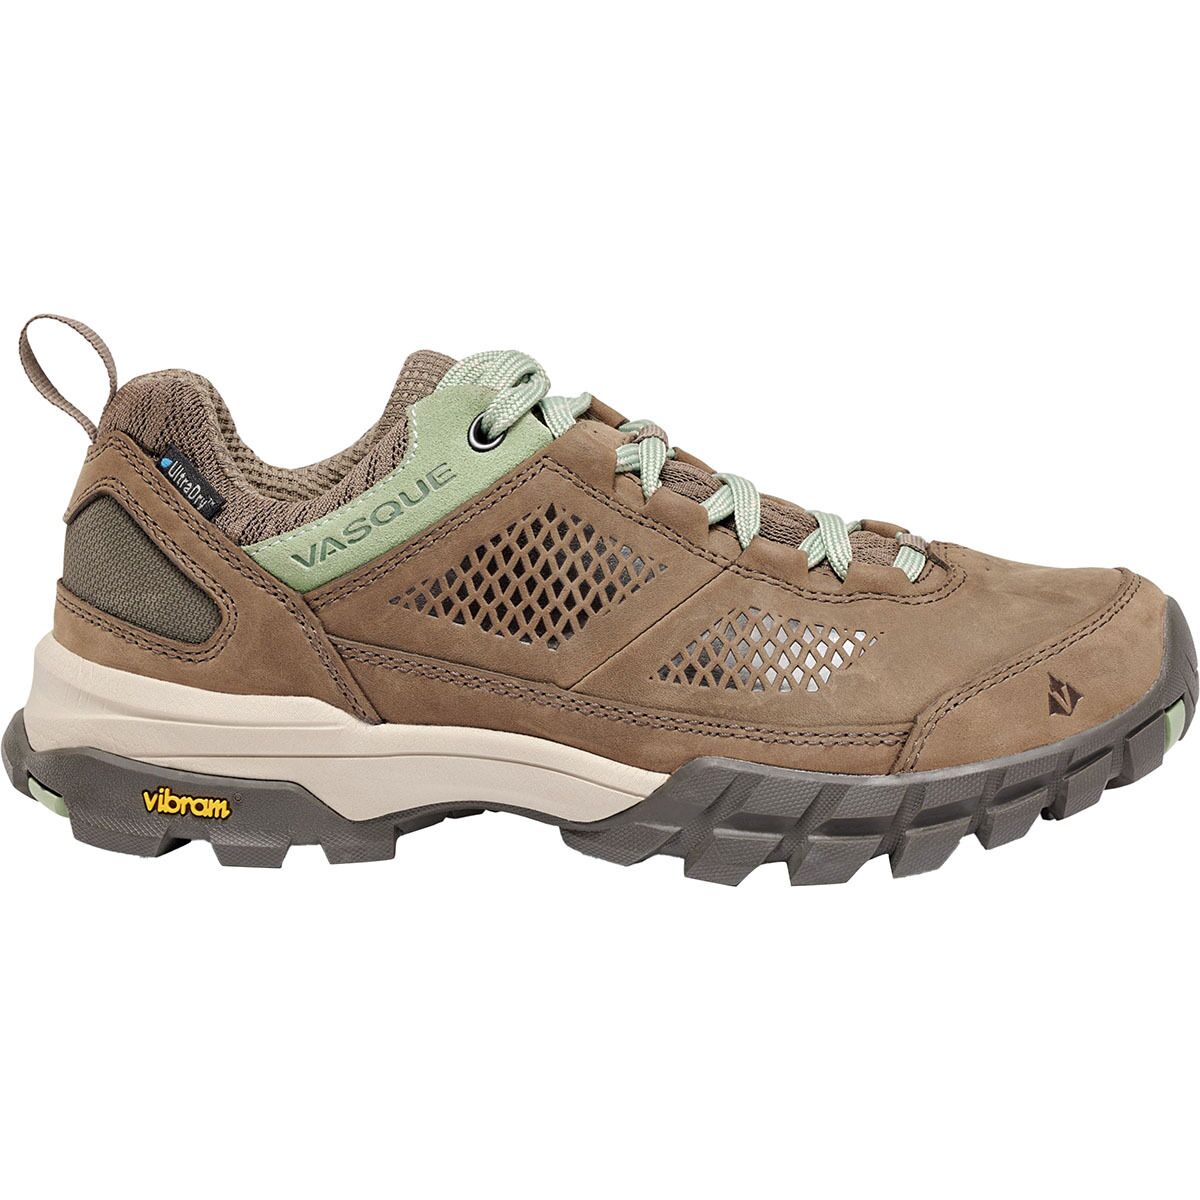 Vasque Talus AT Low UltraDry Hiking Shoe - Women's